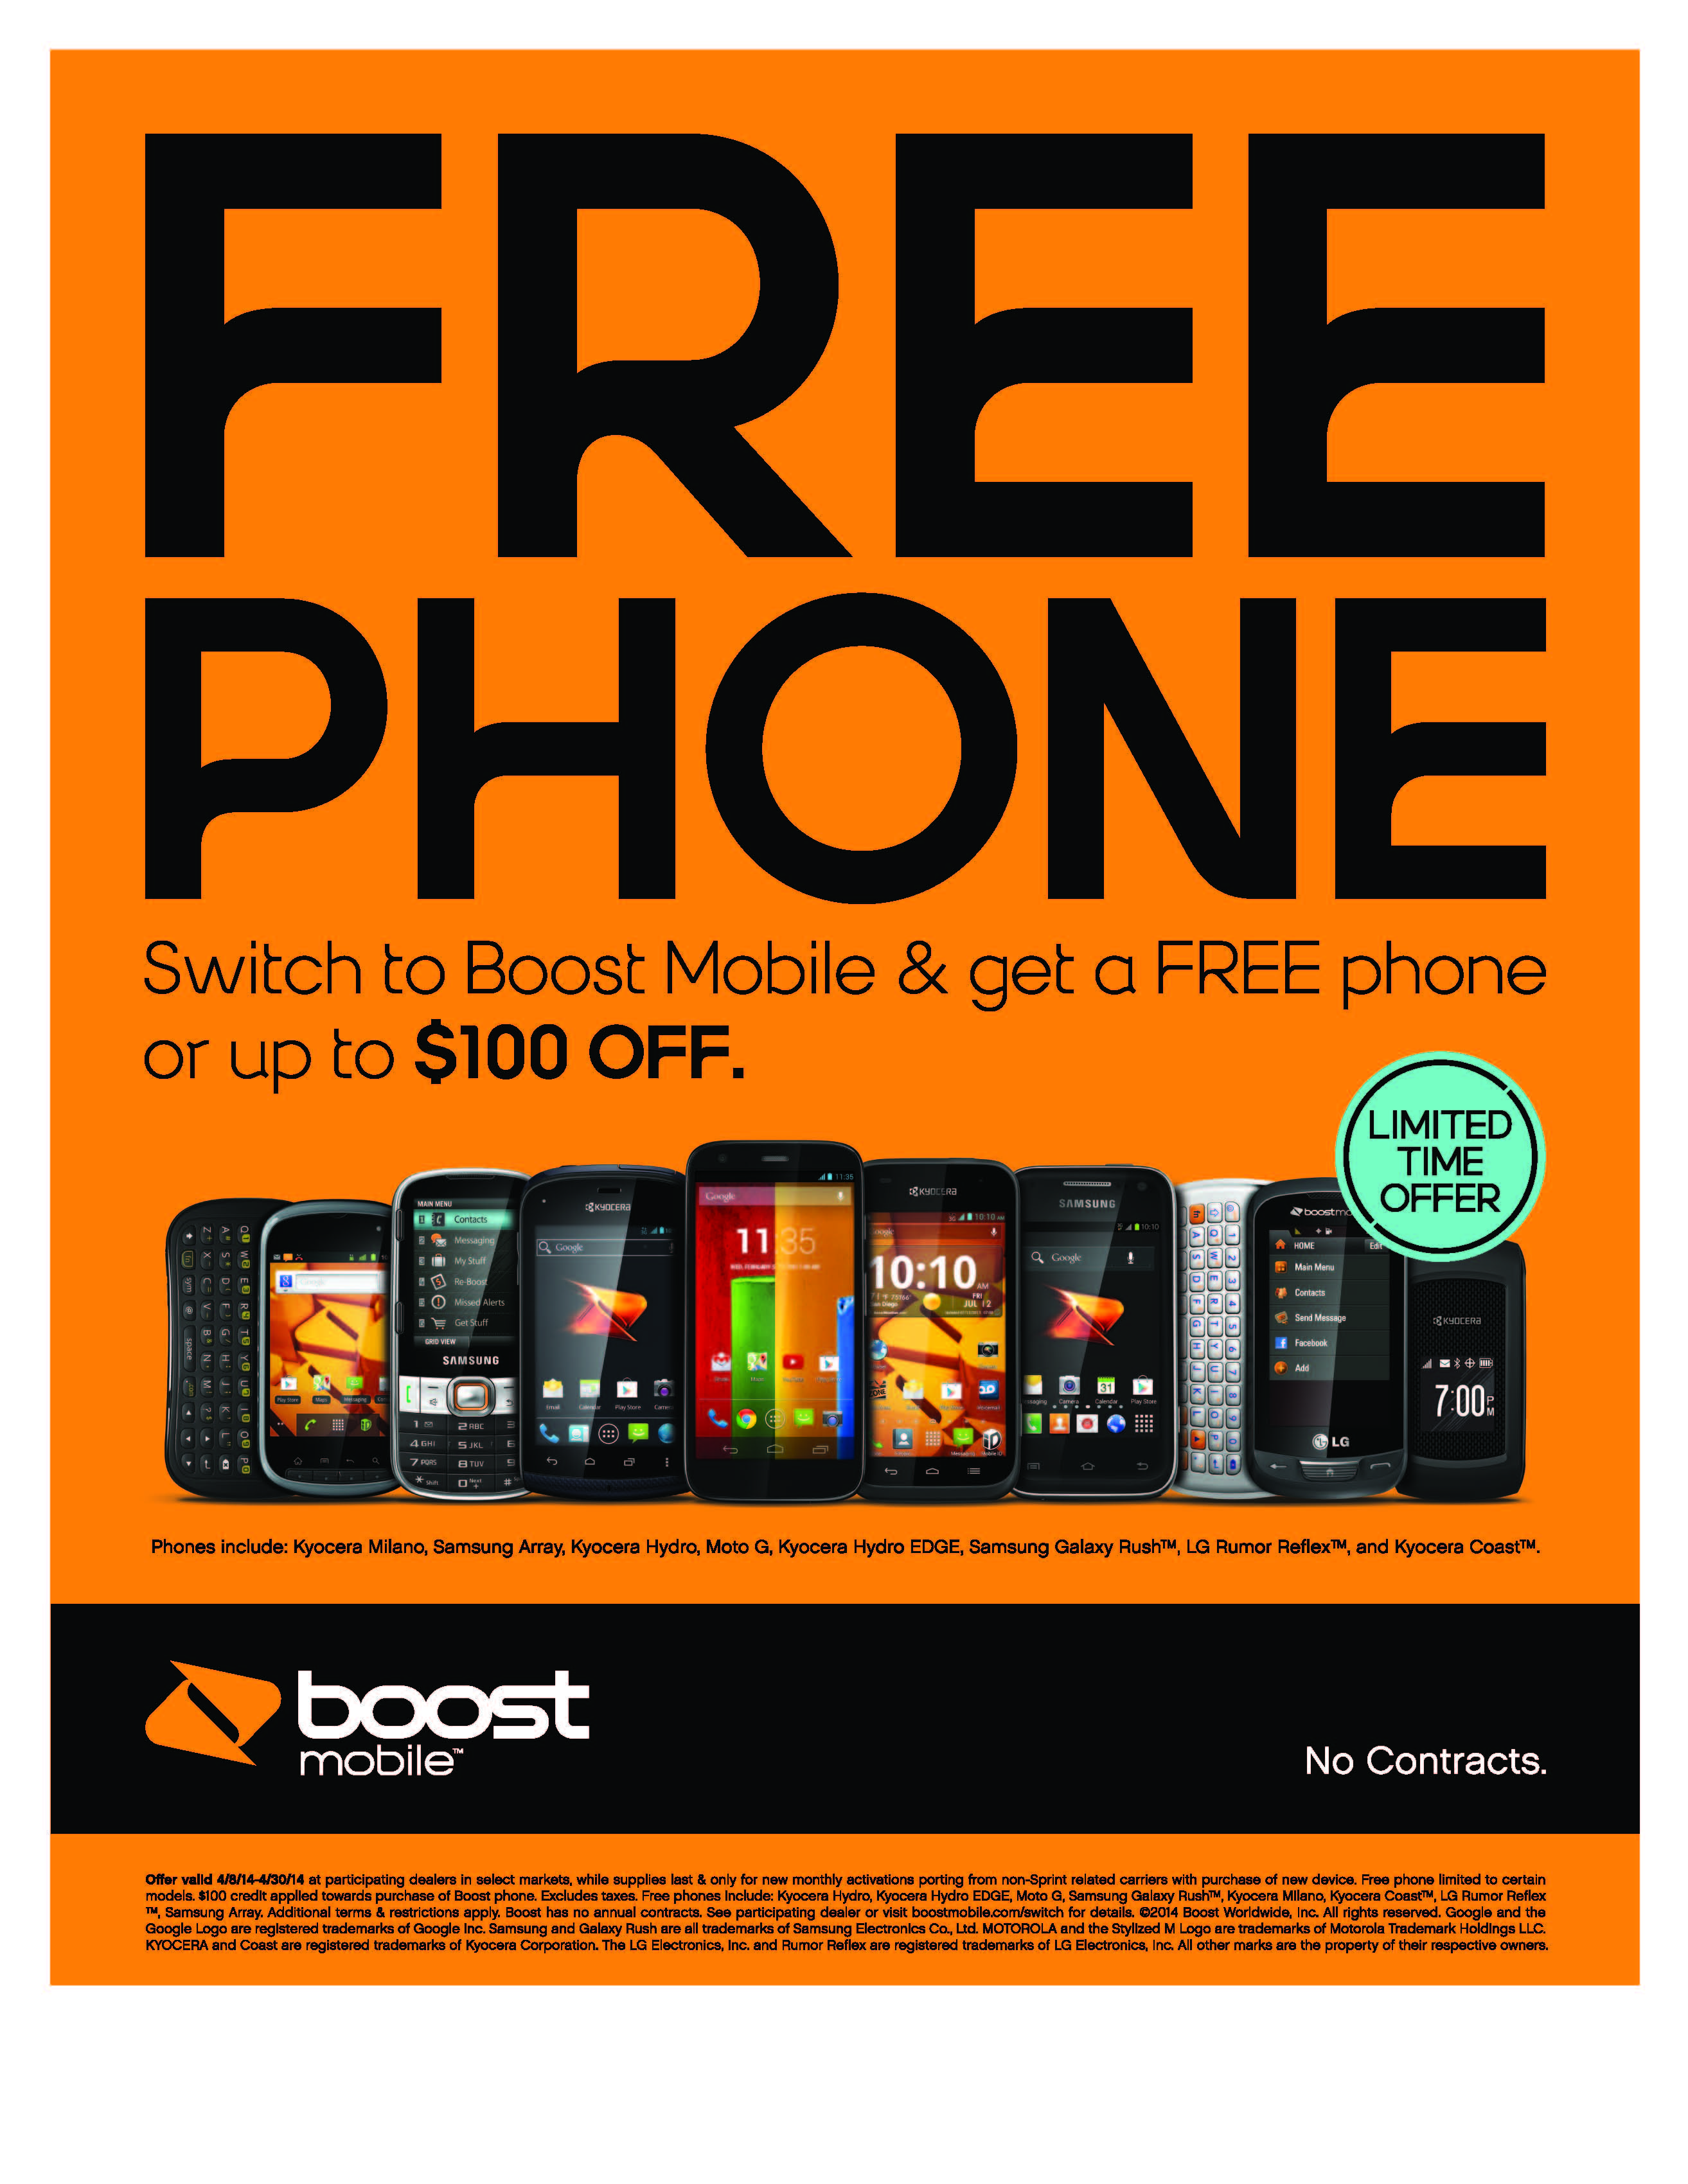 Boost Mobile Up to $100 Off Promotion